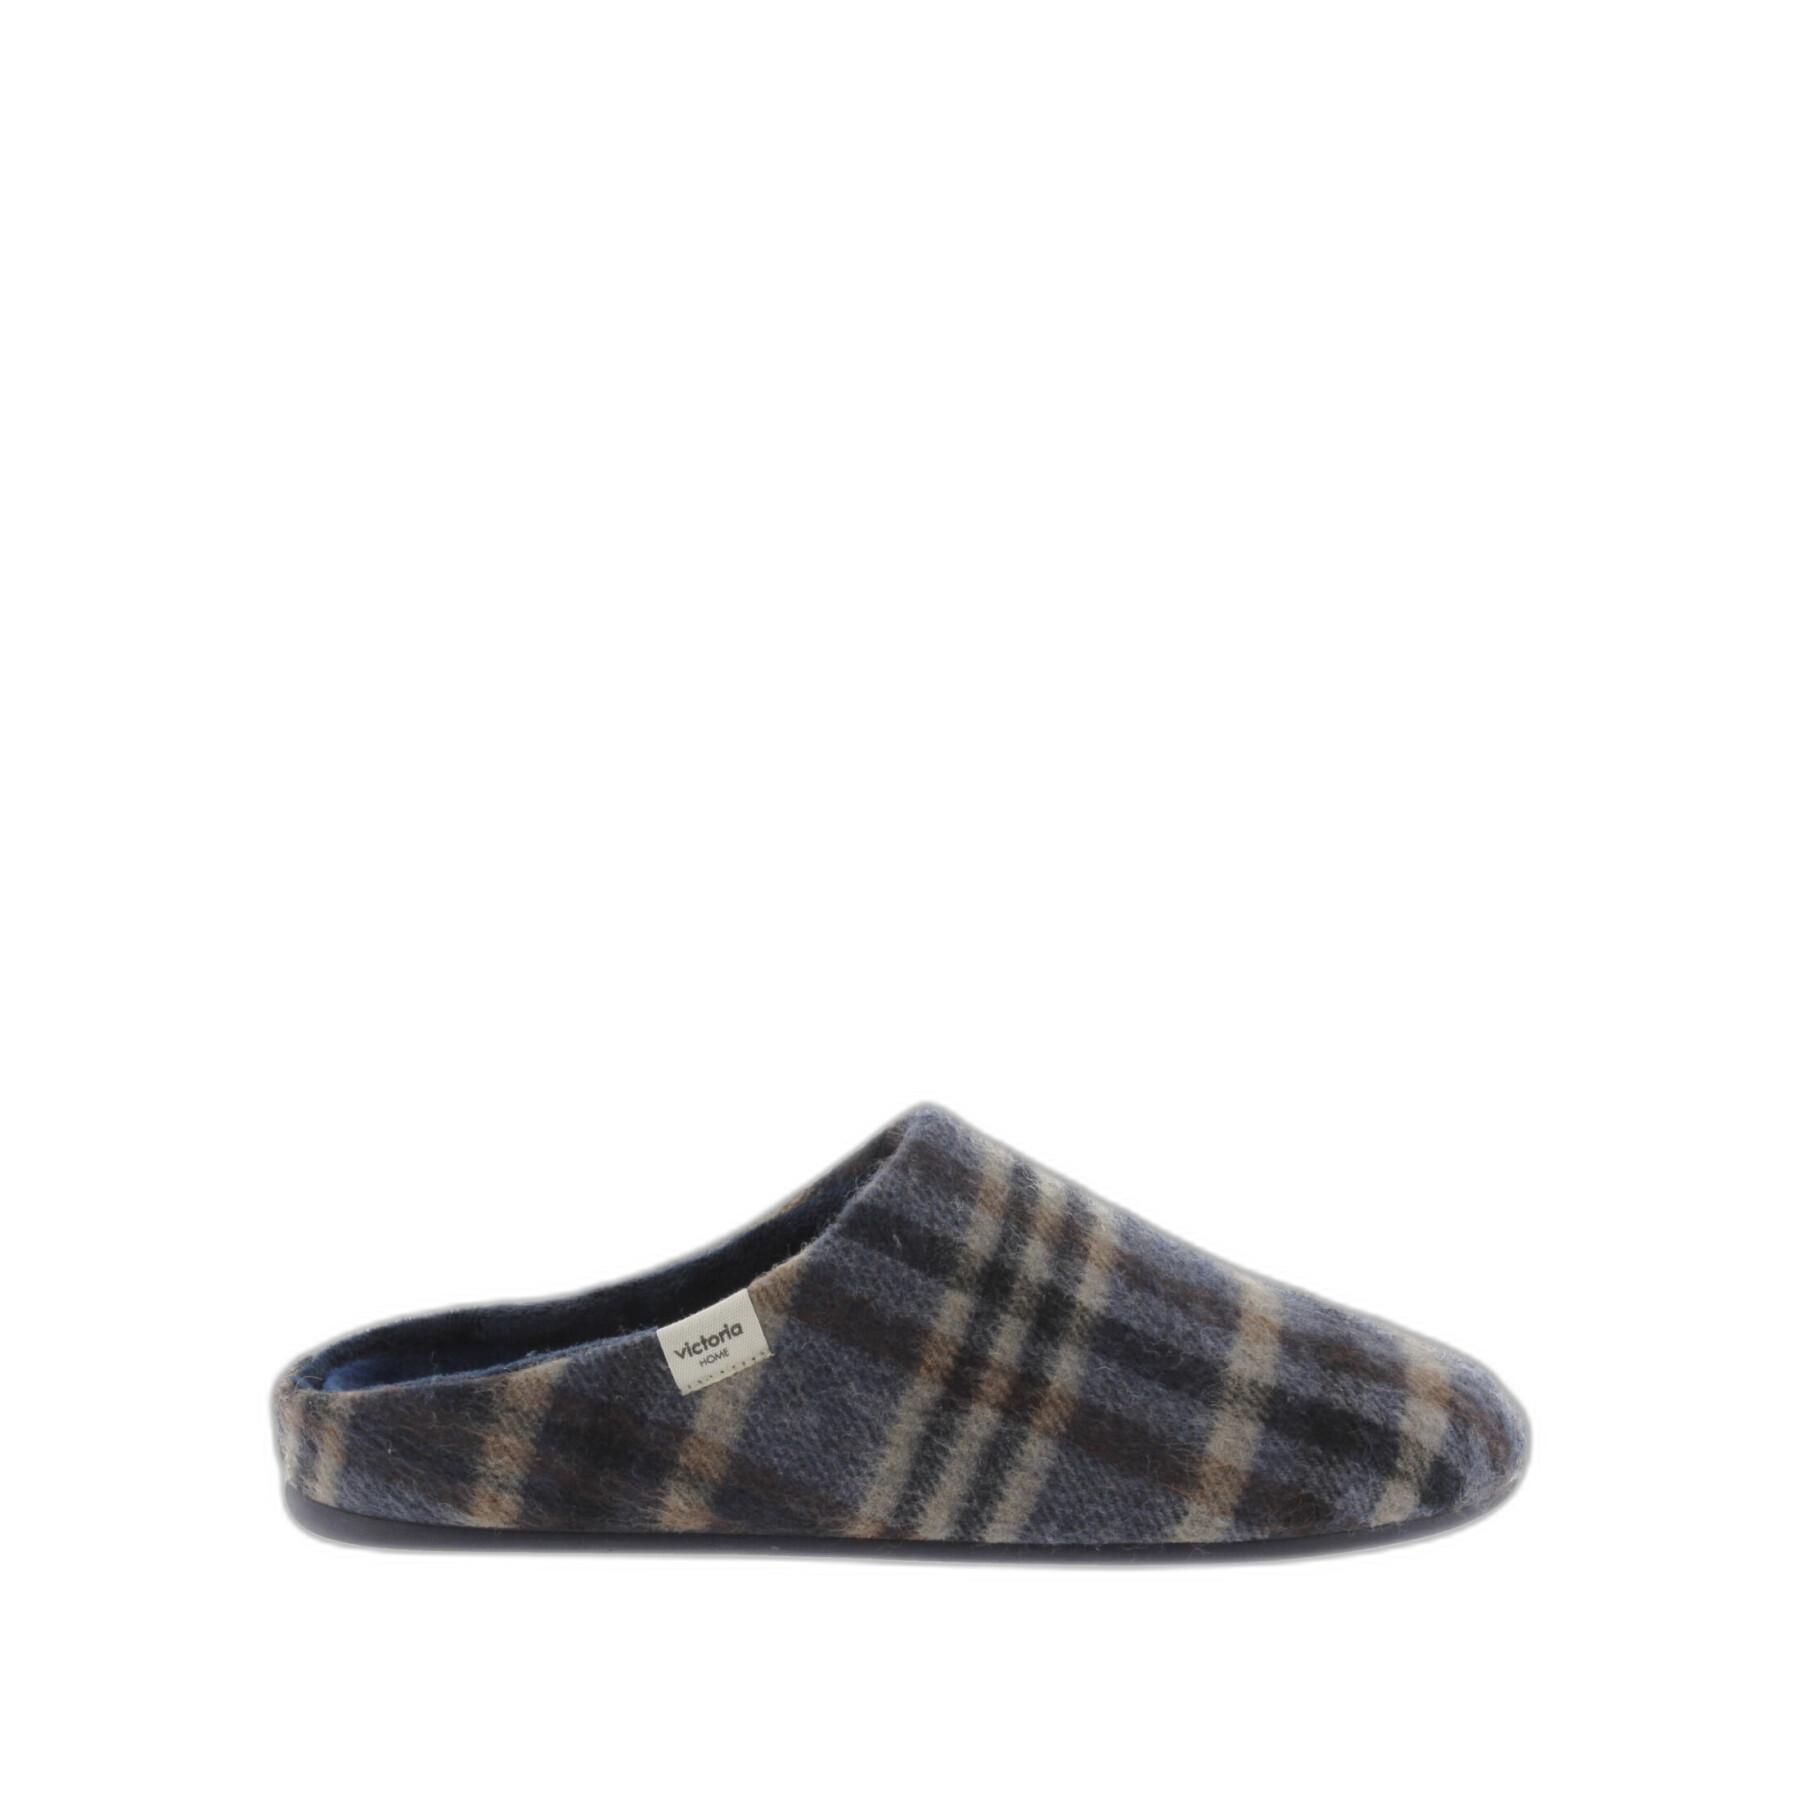 Slippers printed with checks woman Victoria Norte